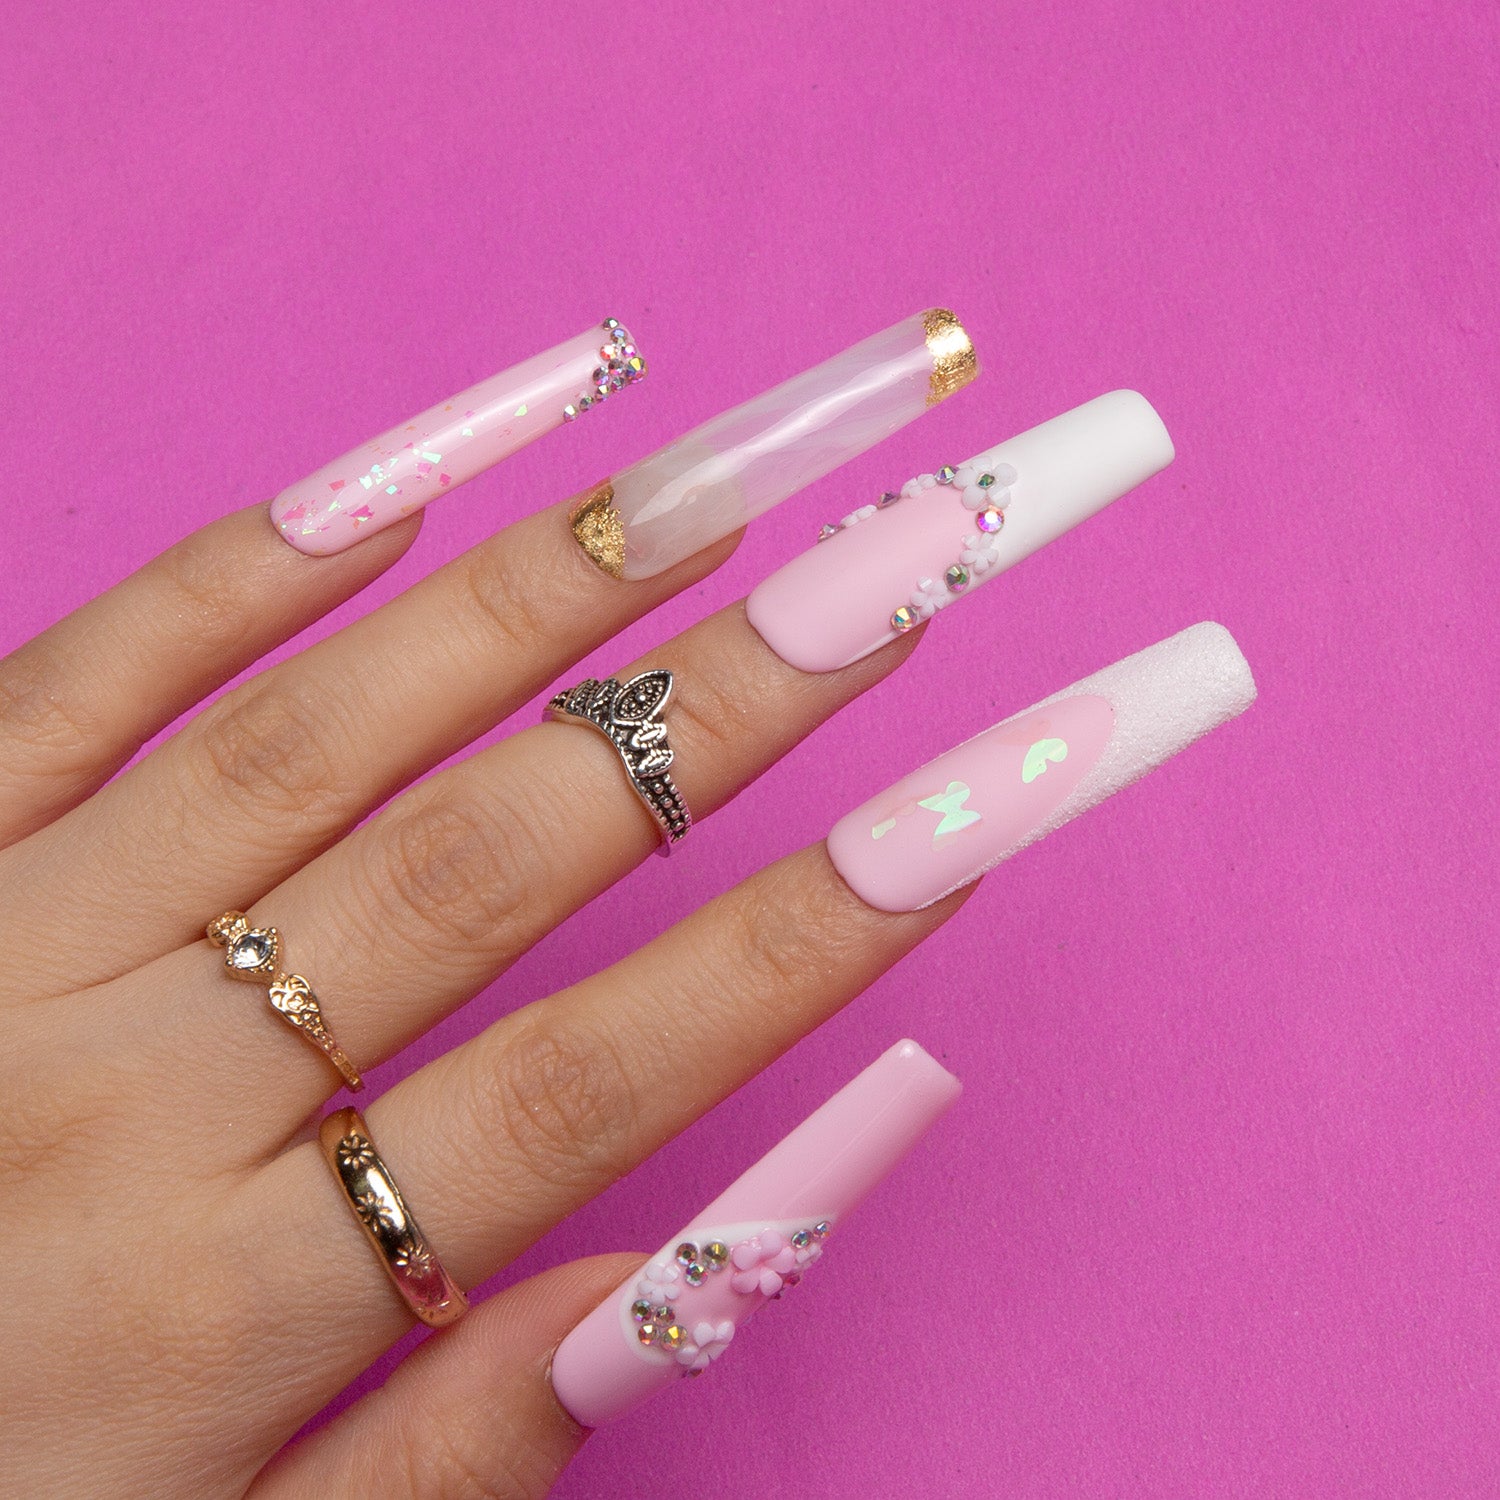 Hand showcasing long square press-on nails in light pink and white with intricate heart-shaped flower and gem designs on a pink background, worn with elegant rings